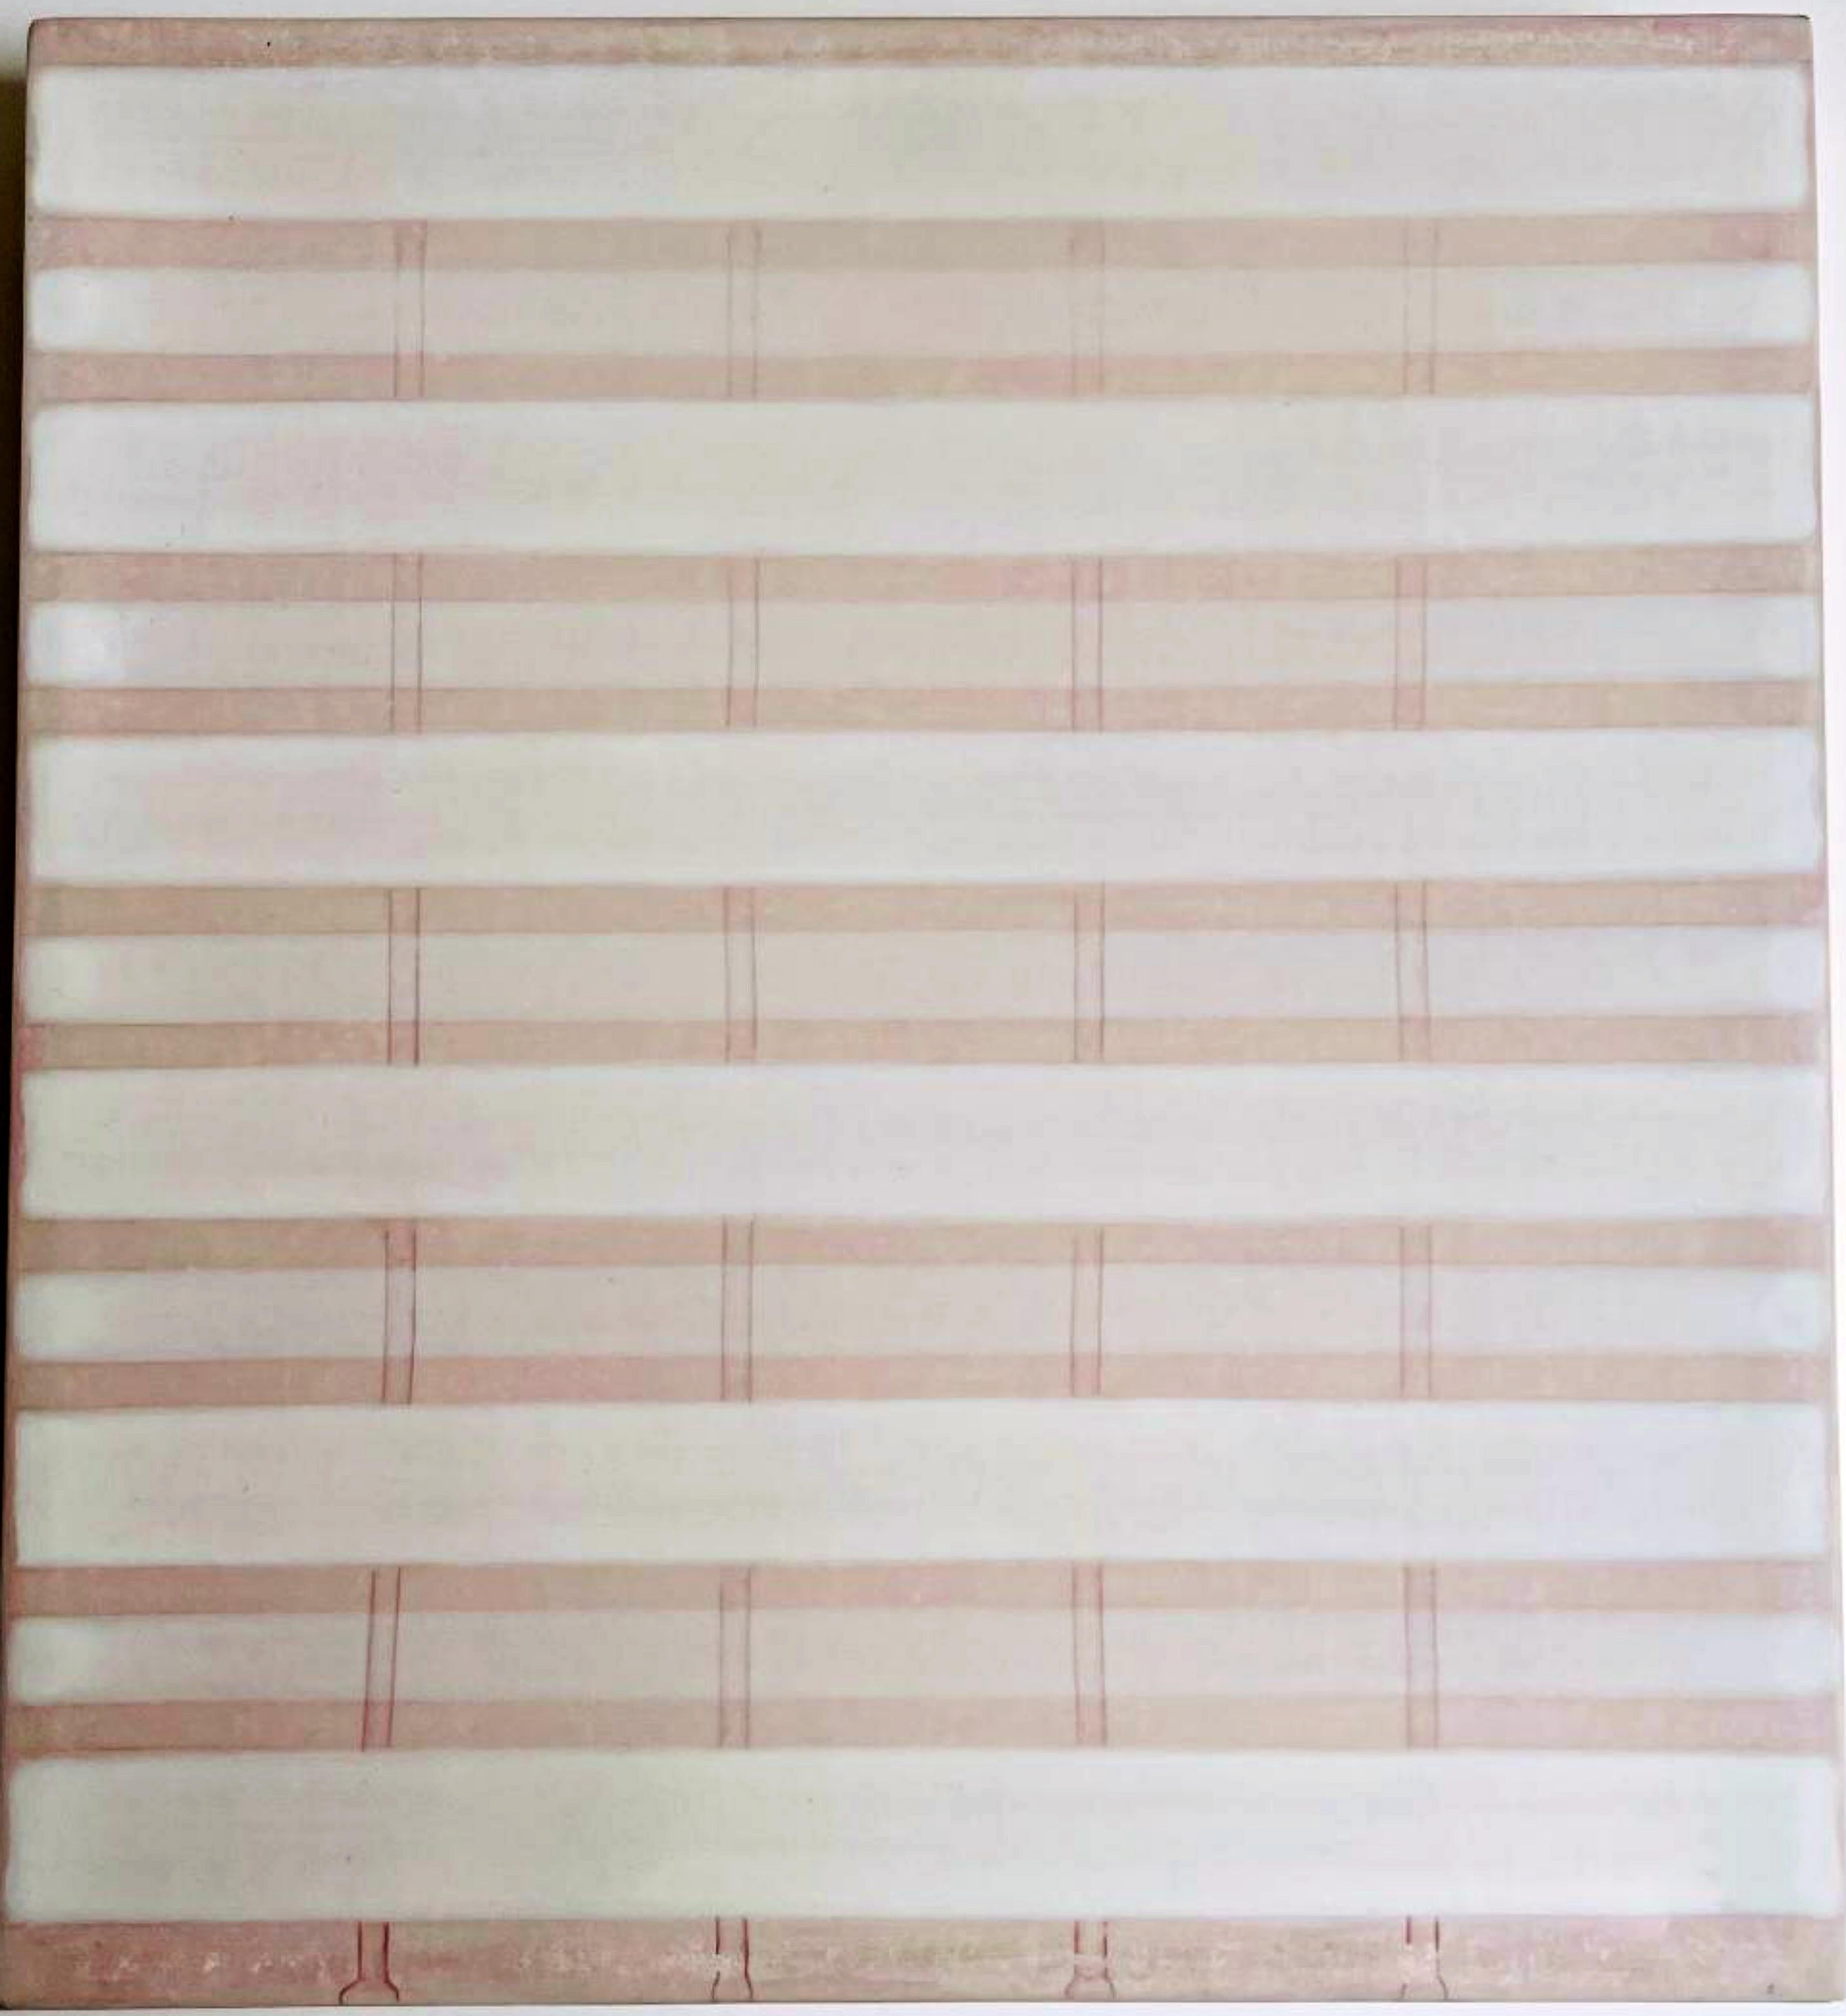 Deep Creek Seeps 10, Minimalist painting inspired by Agnes Martin New Mexico art - Mixed Media Art by Johnnie Winona Ross